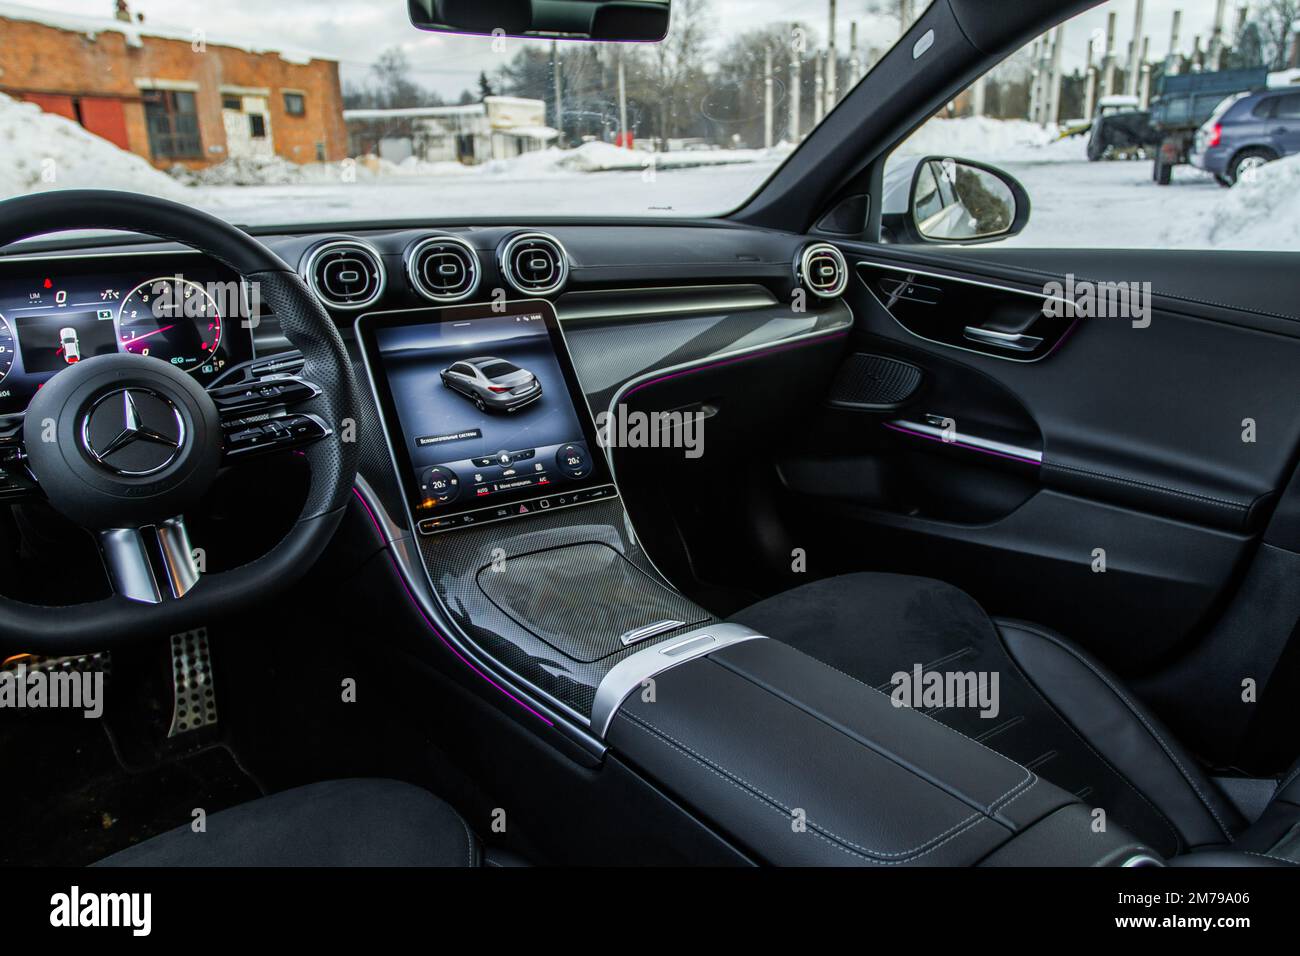 https://c8.alamy.com/comp/2M79A06/moscow-russia-february-02-2022-mercedes-benz-c-class-200-w206-interior-view-compact-luxury-sedan-car-central-console-of-the-new-mercedes-be-2M79A06.jpg